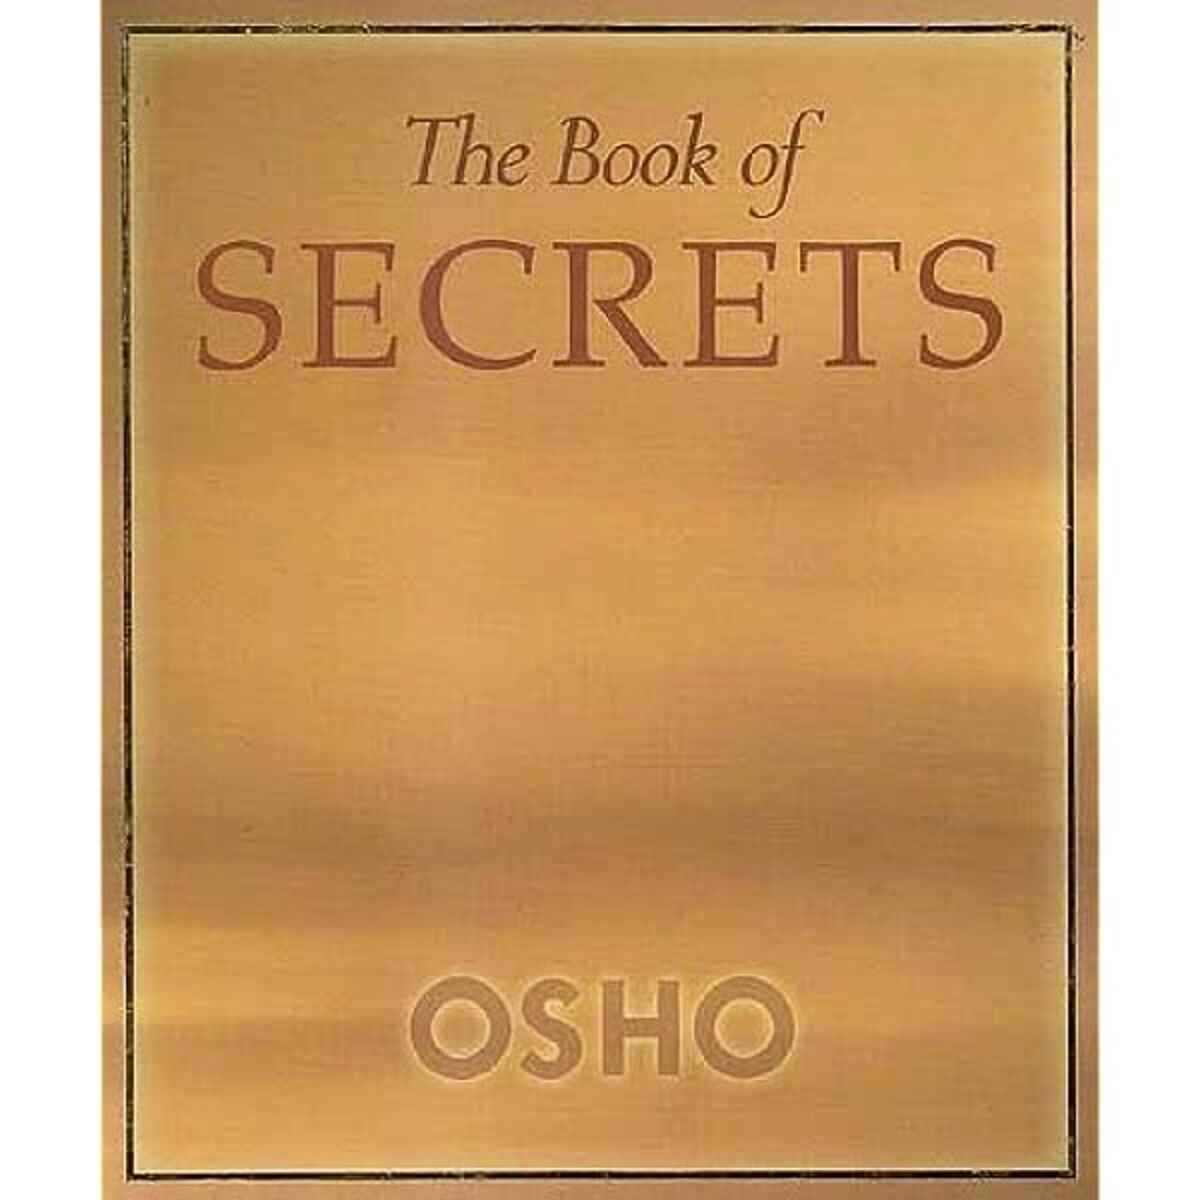 Osho's The Book of Secrets